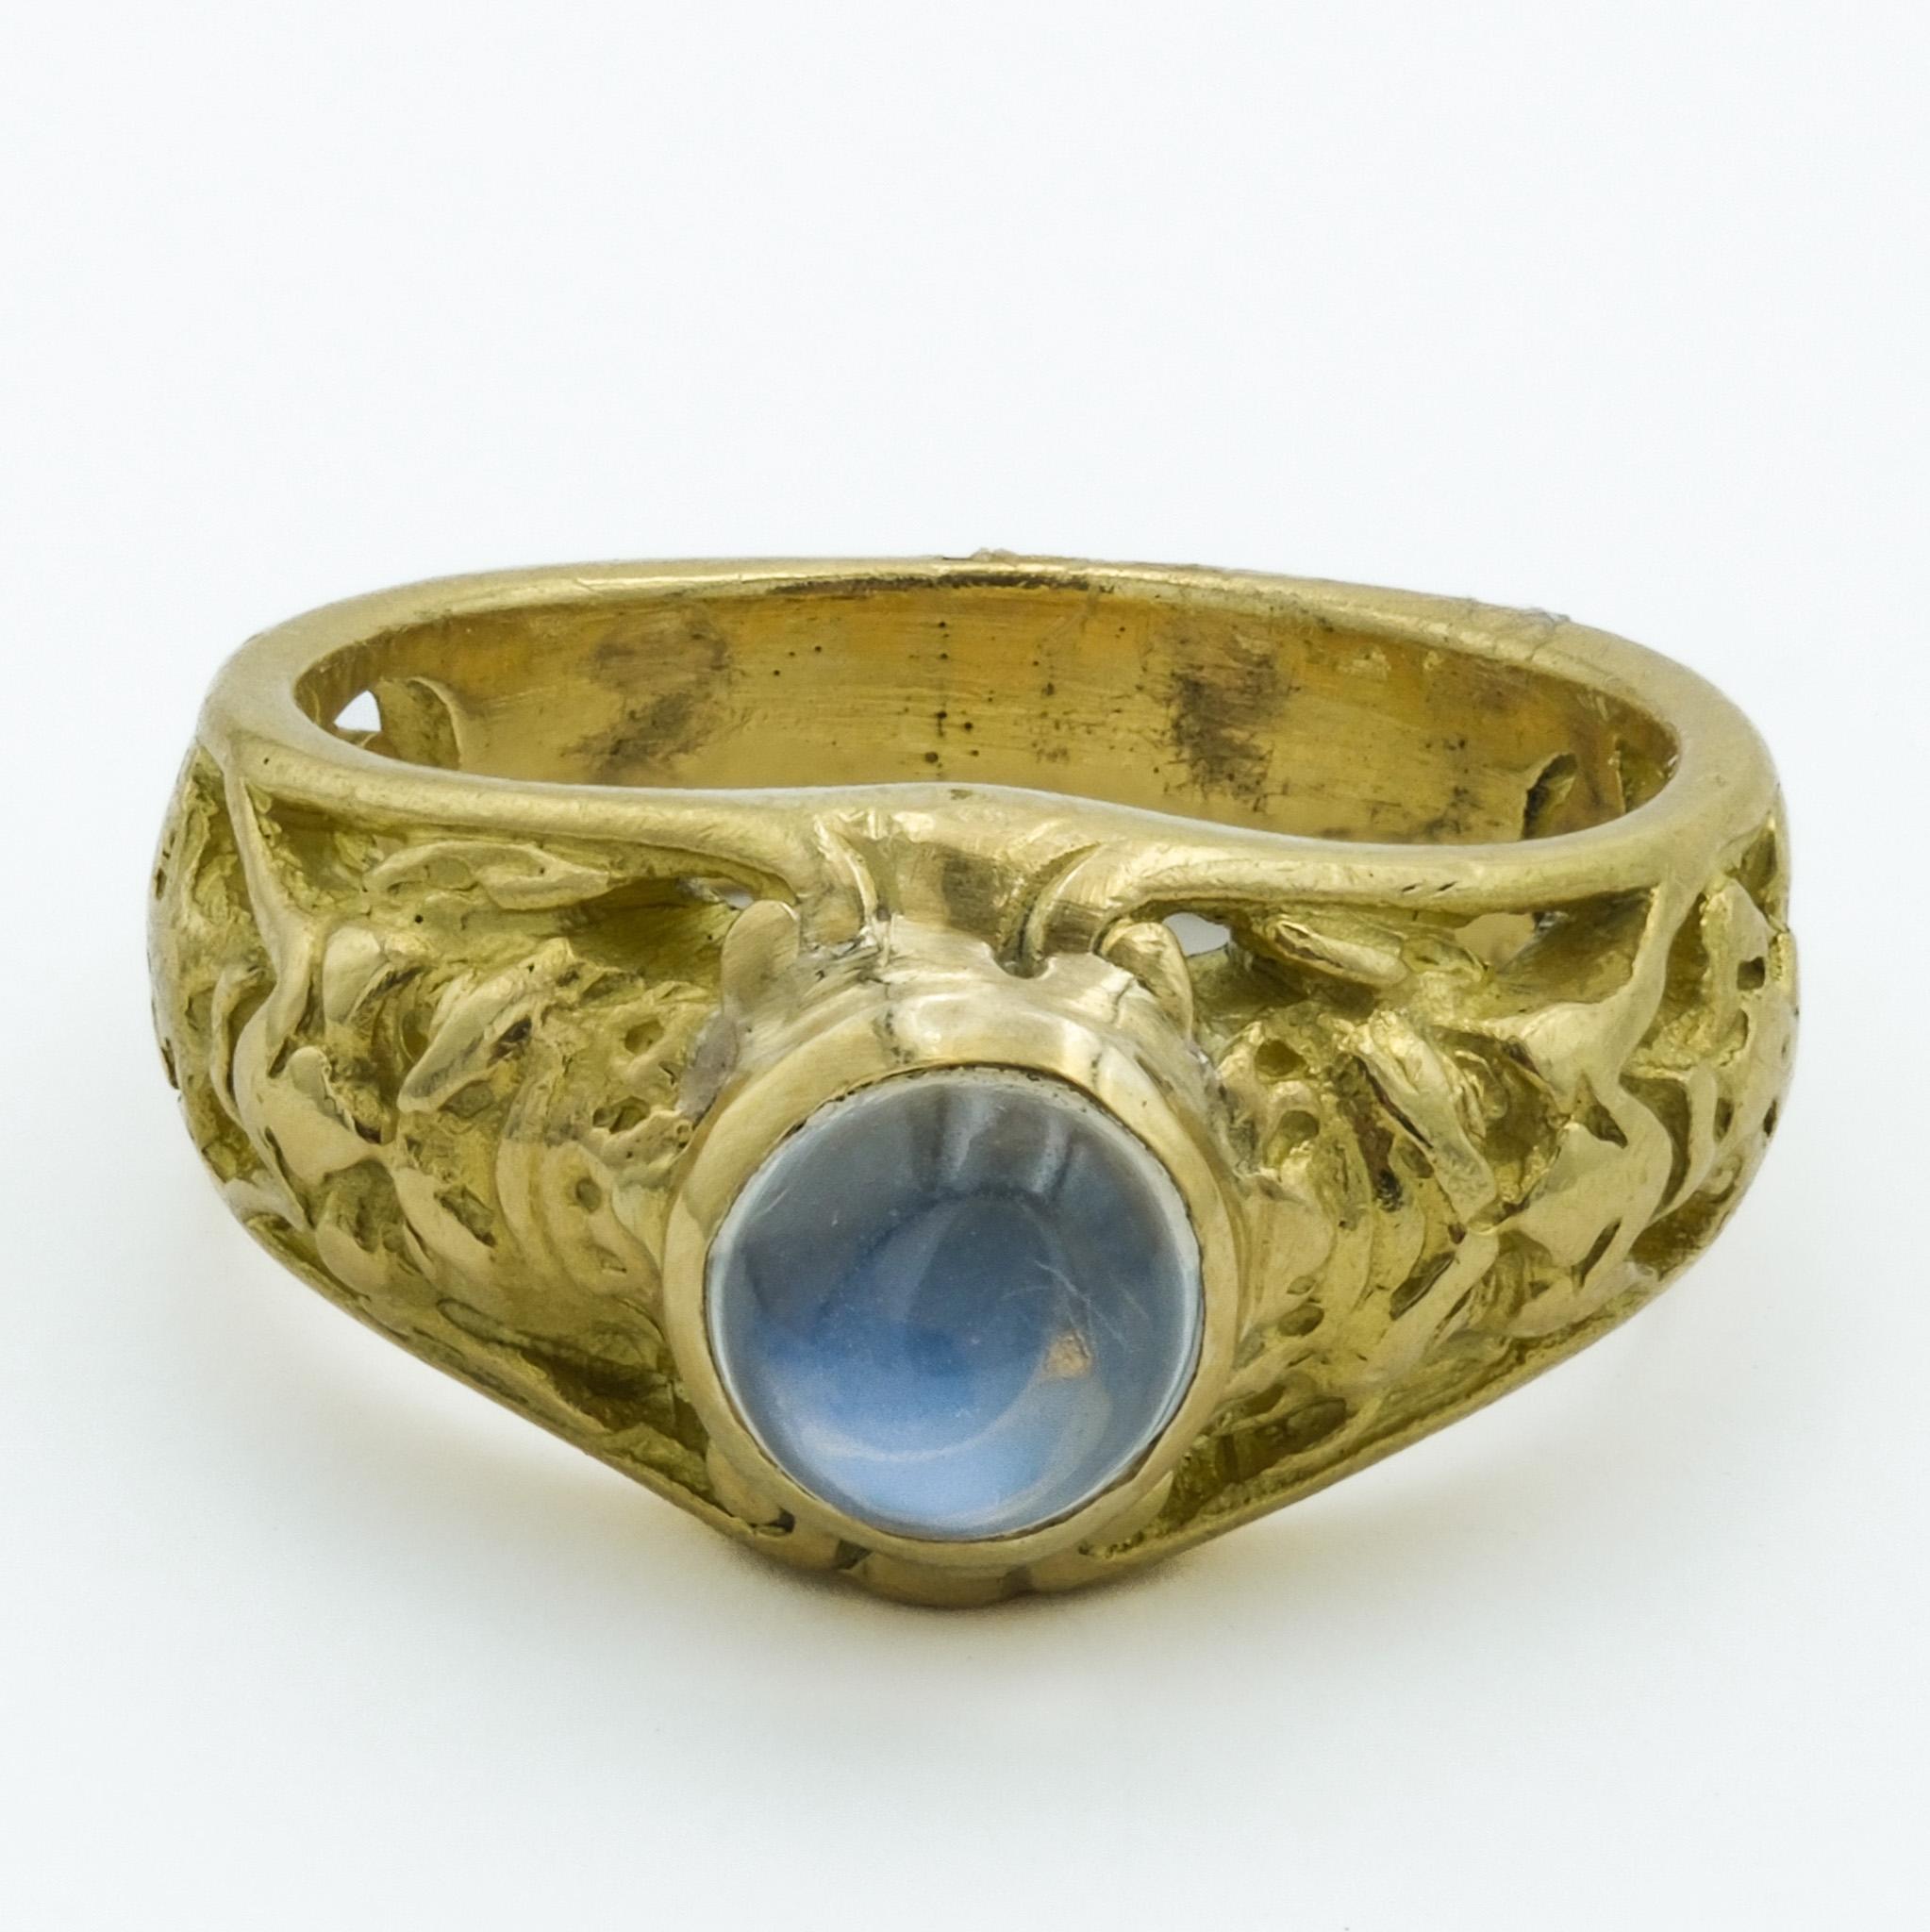 This is an exquisite piece of Art Nouveau jewelry, specifically an 18-karat gold ring that encapsulates the era's affinity for organic and flowing designs. The band of the ring features intricately carved figure that suggest a baroque influence,